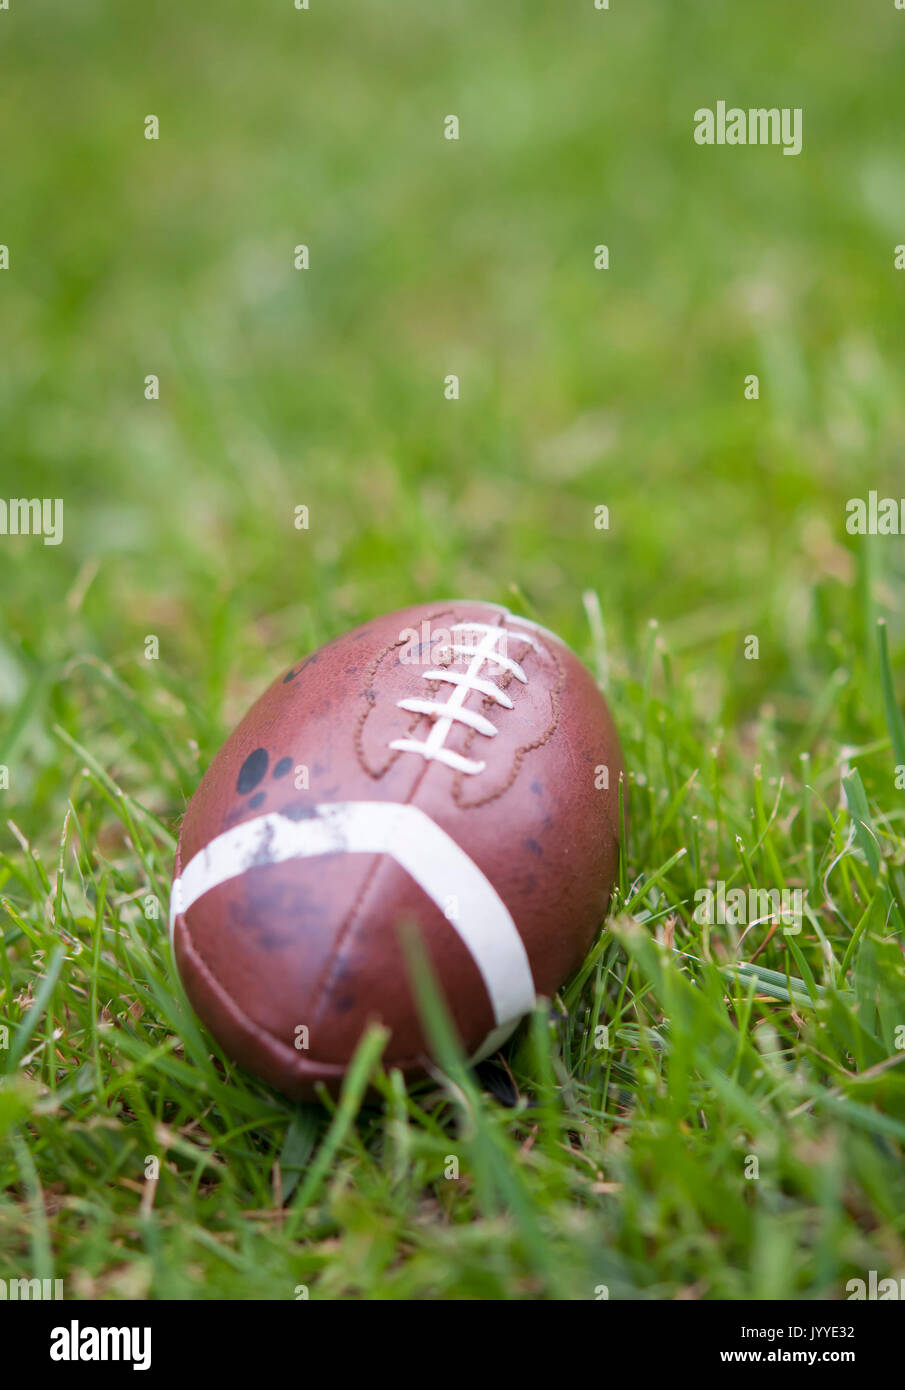 american football isolated laying in the summer grass Stock Photo